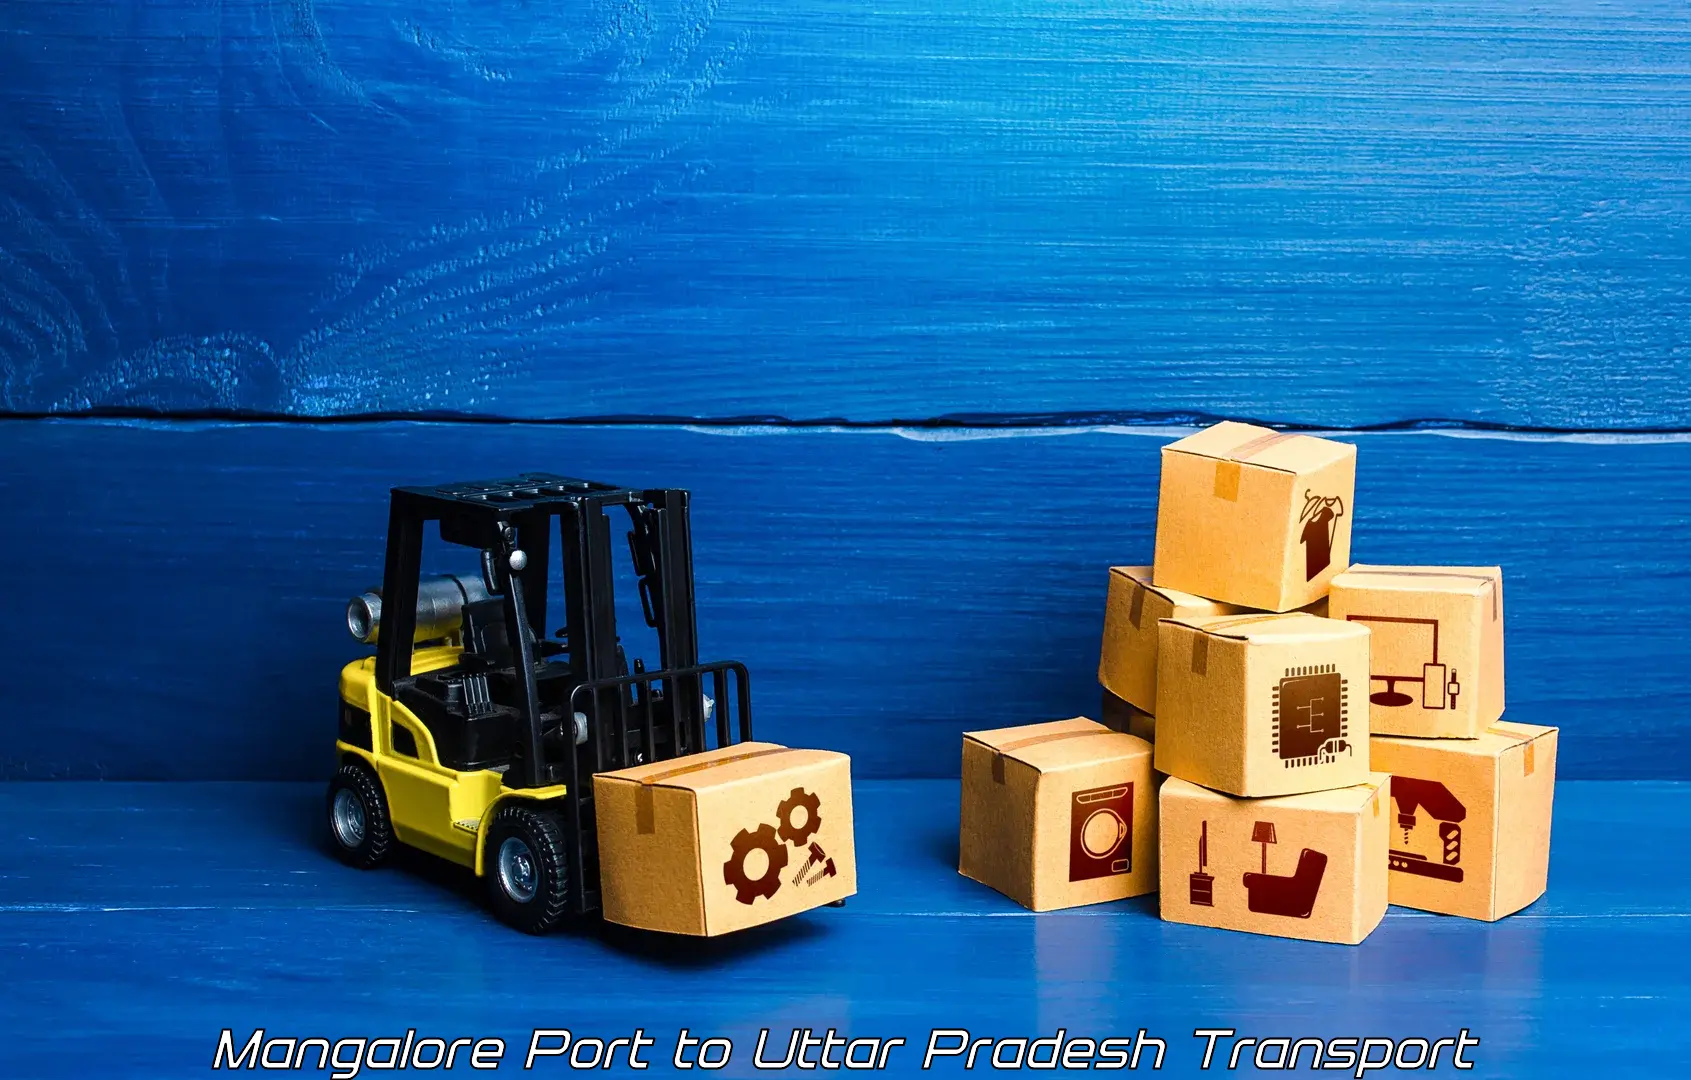 Express transport services Mangalore Port to Rasulabad